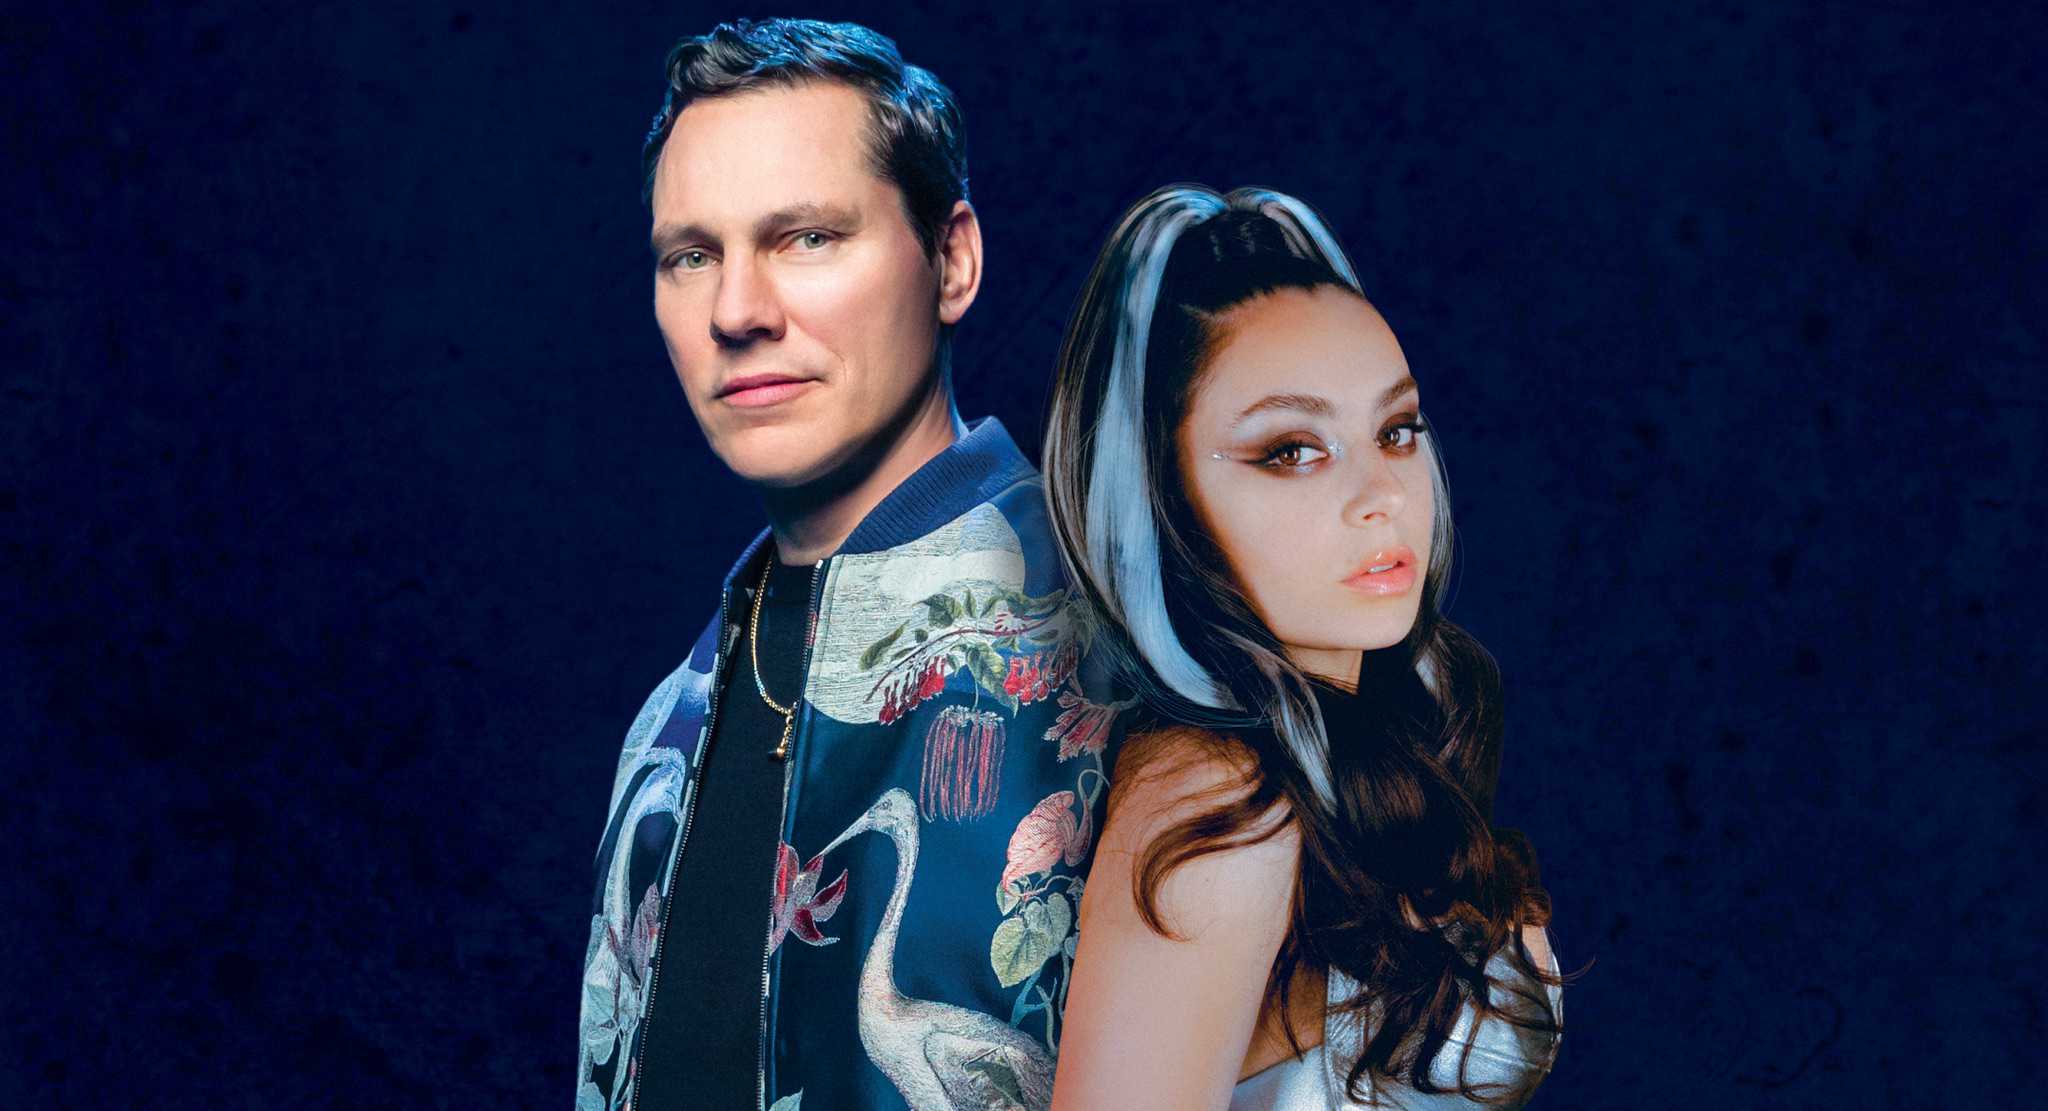 Tiësto & Charli XCX collaborate for the empowerment fuelled track ‘Hot In It’: Listen